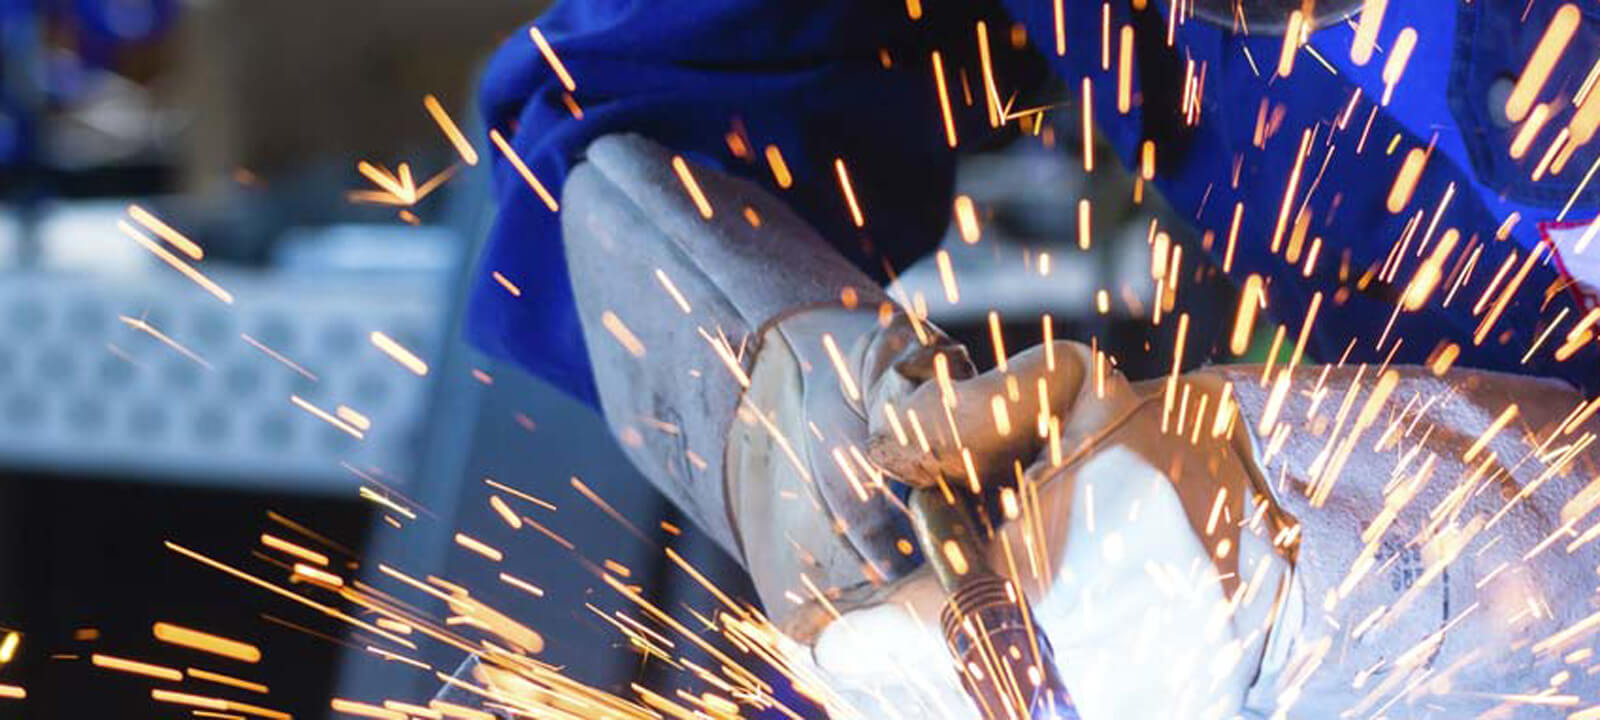 Sparks flying while welding at Taylor Made Iron Services.